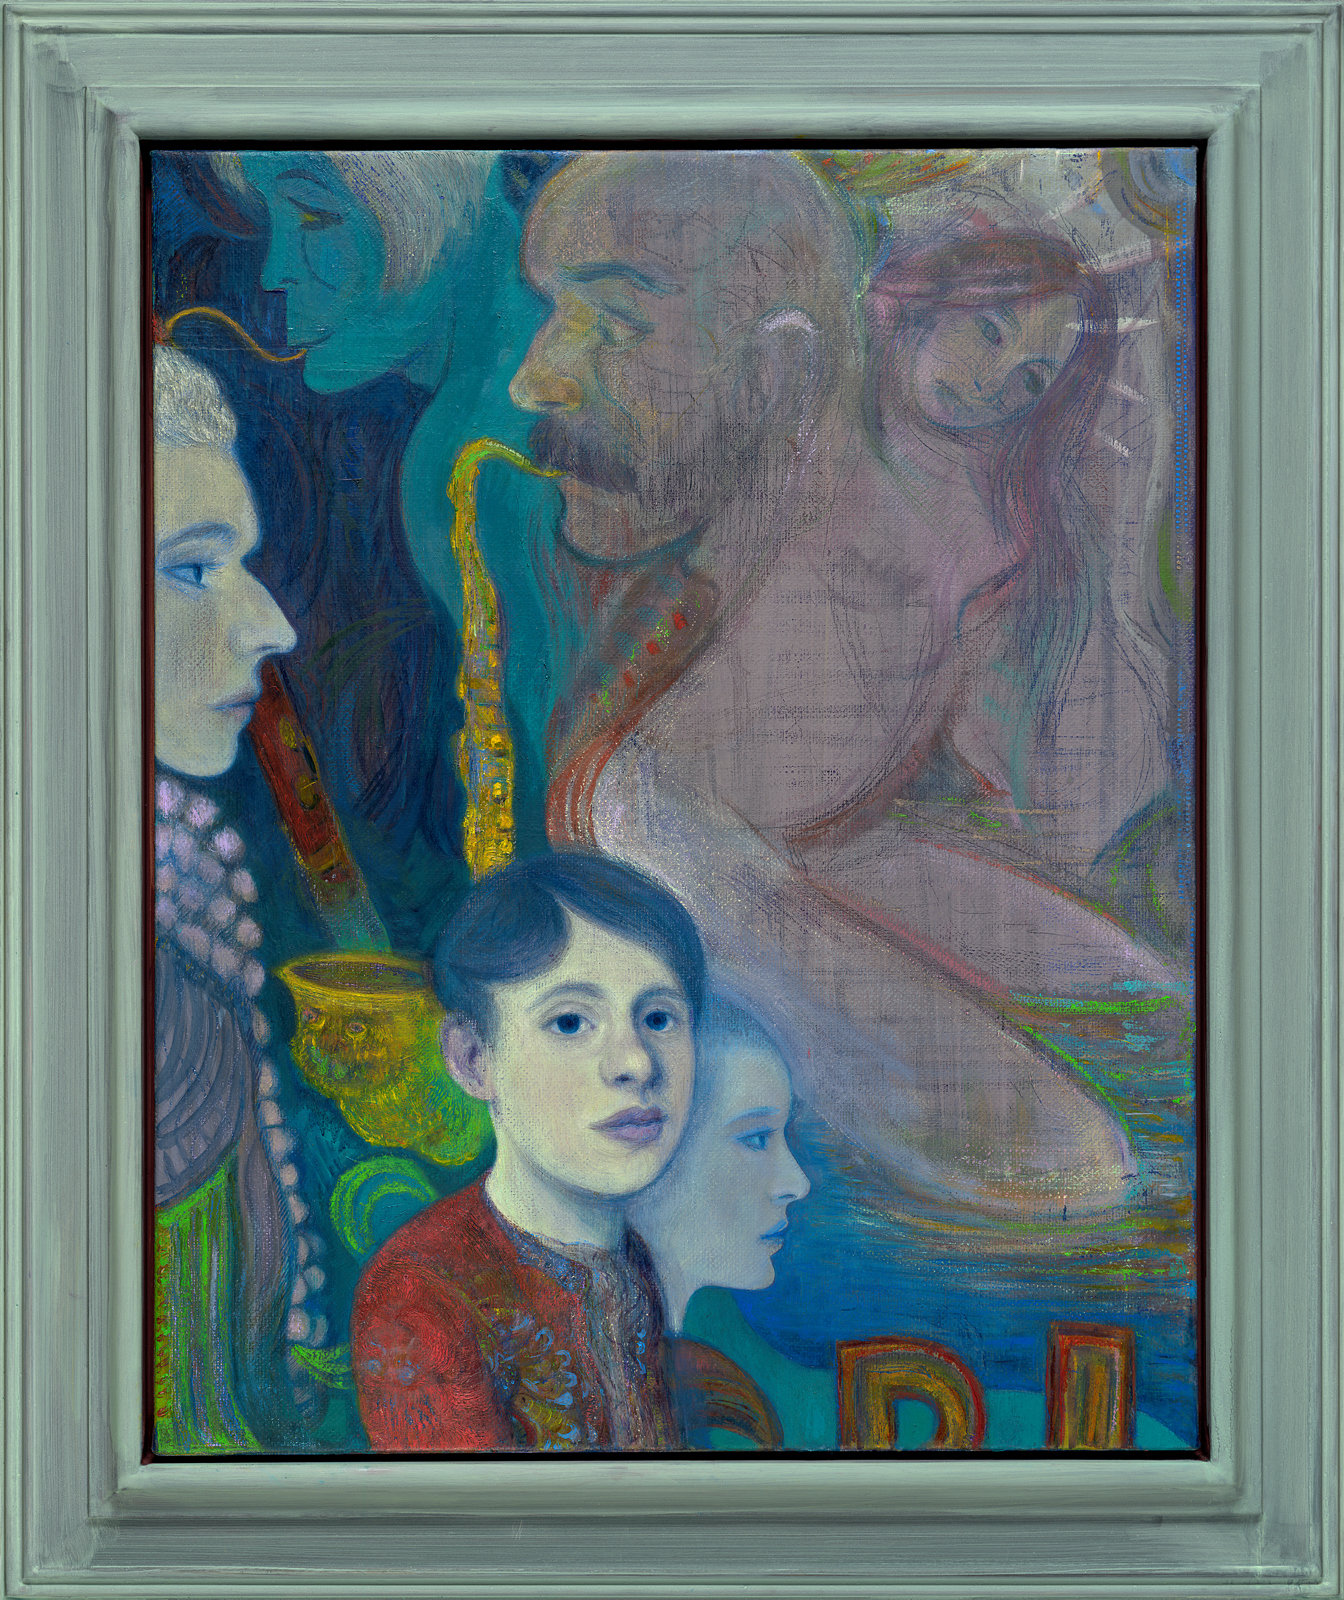 Steven Shearer. Young Symbolist, 2013. Acrylic and oil on canvas; artist's frame. Image: 30 x 24 inches; Frame: 37 1⁄4 x 31 1⁄4 inches. Collection of Allan Switzer & Sandy Hazan. © Steven Shearer. Courtesy of the artist, Galerie Eva Presenhuber, Zurich, and Gavin Brown’s enterprise, New York.